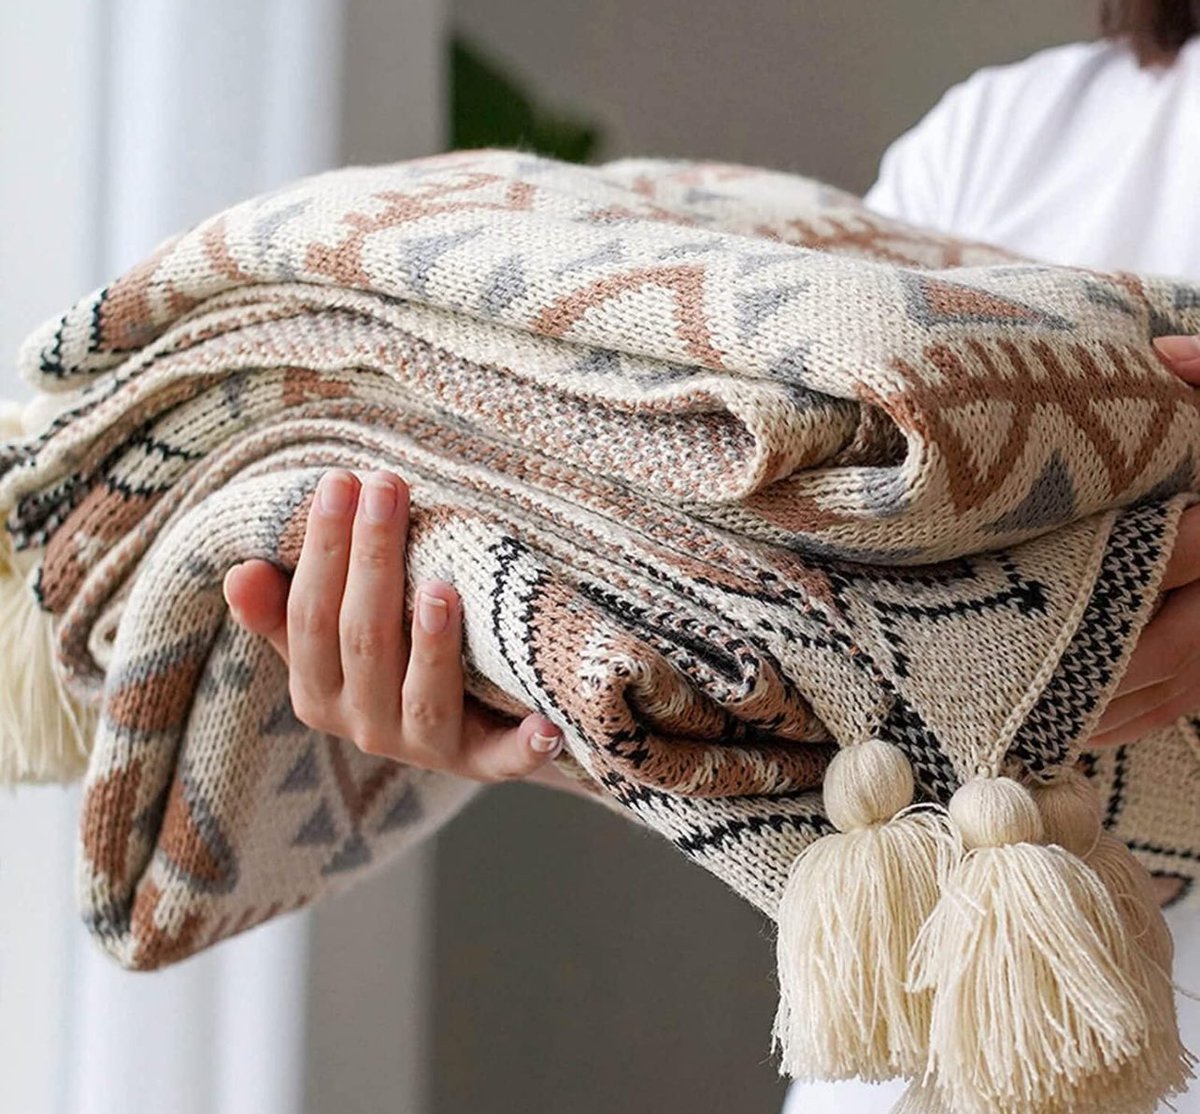 Arabest Bohemian Throw Blankets, Soft Cozy Lightweight Knitted with Tassels Fall can used as a Couch Decorative Throw Blankets#, Bed, Sofa, All Seasons. Available at 155,000k